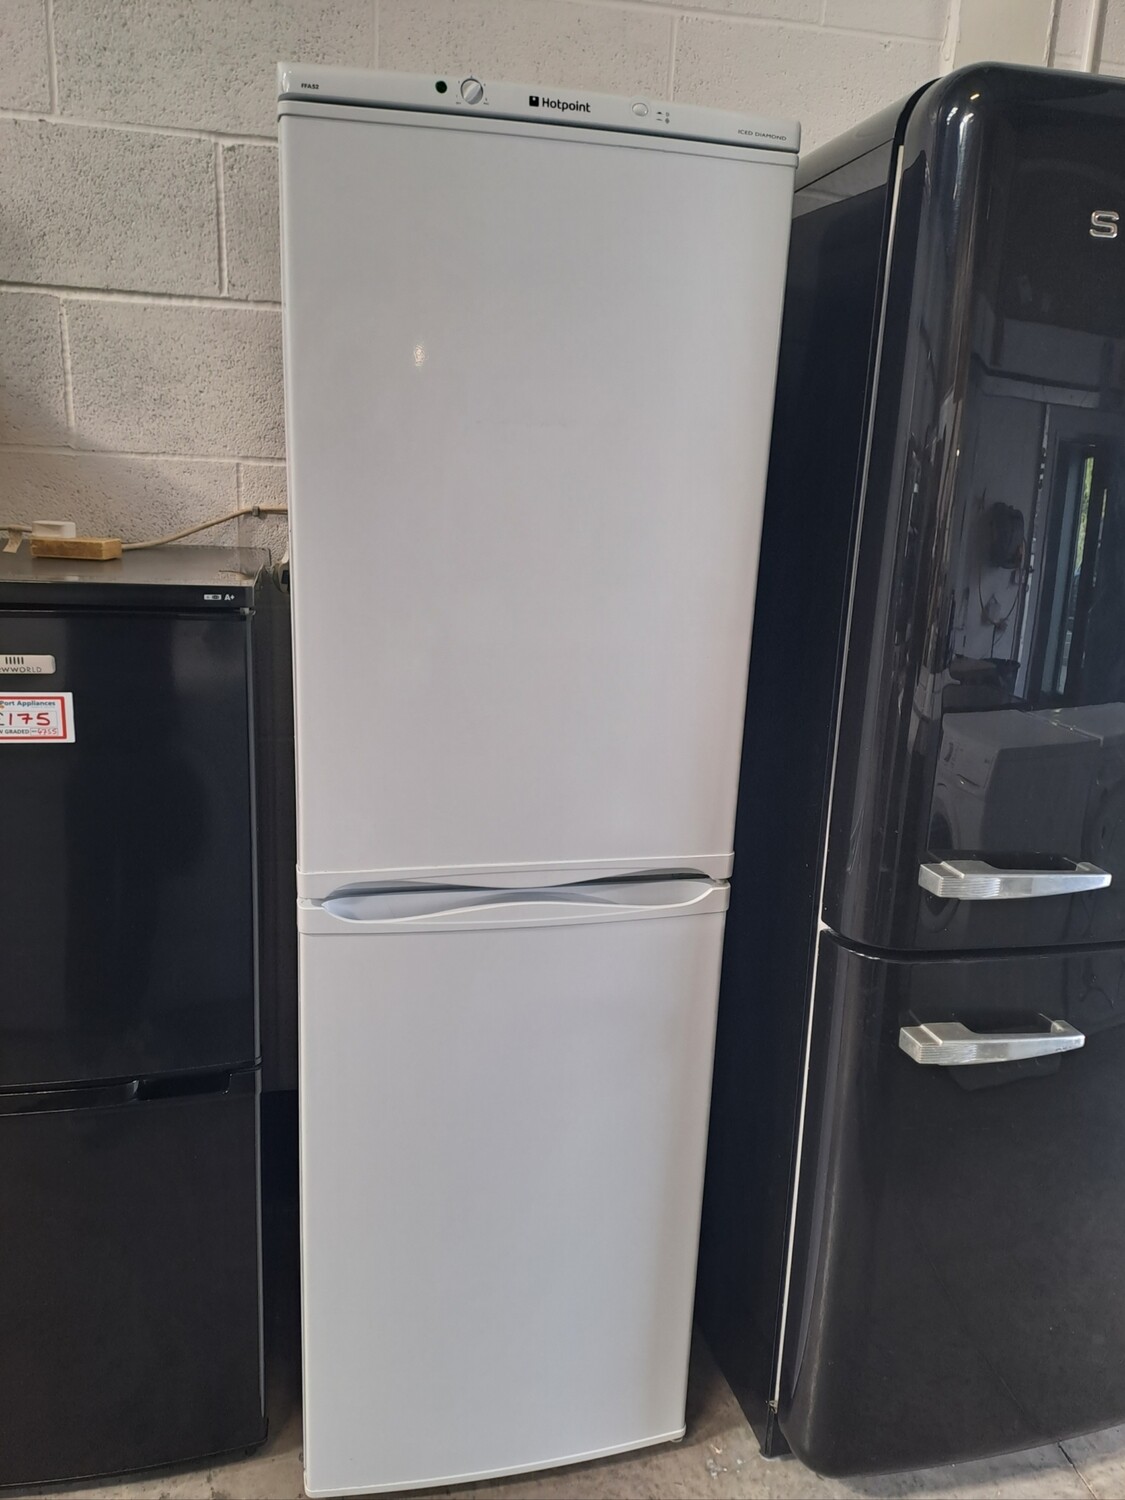 Hotpoint FFA52P Fridge Freezer White H174 x W55 x D60 Refurbished 6 Month Guarantee. This item is located in our Whitby Road Shop 